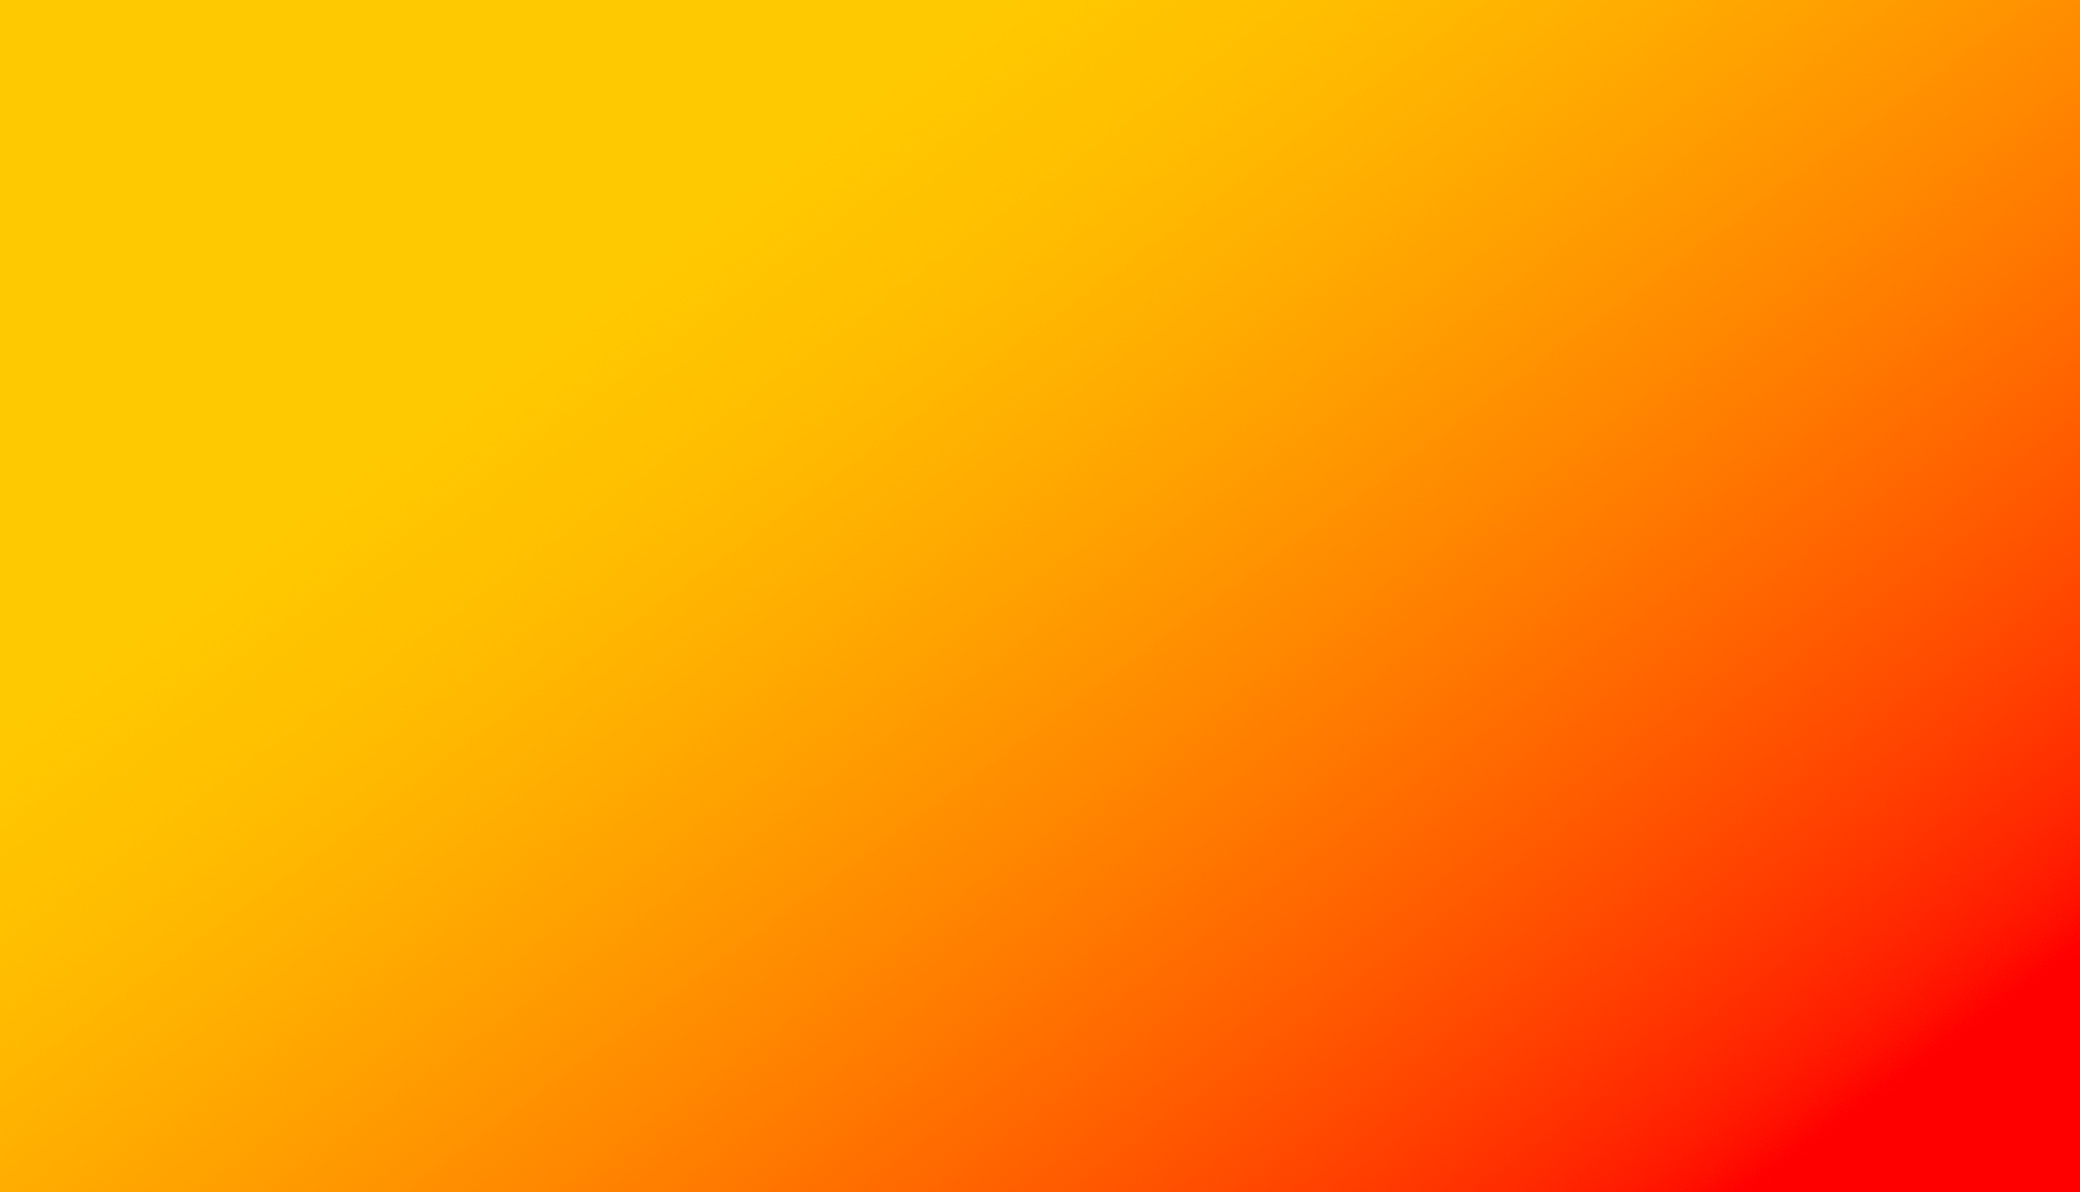 Yellow to Red Gradient